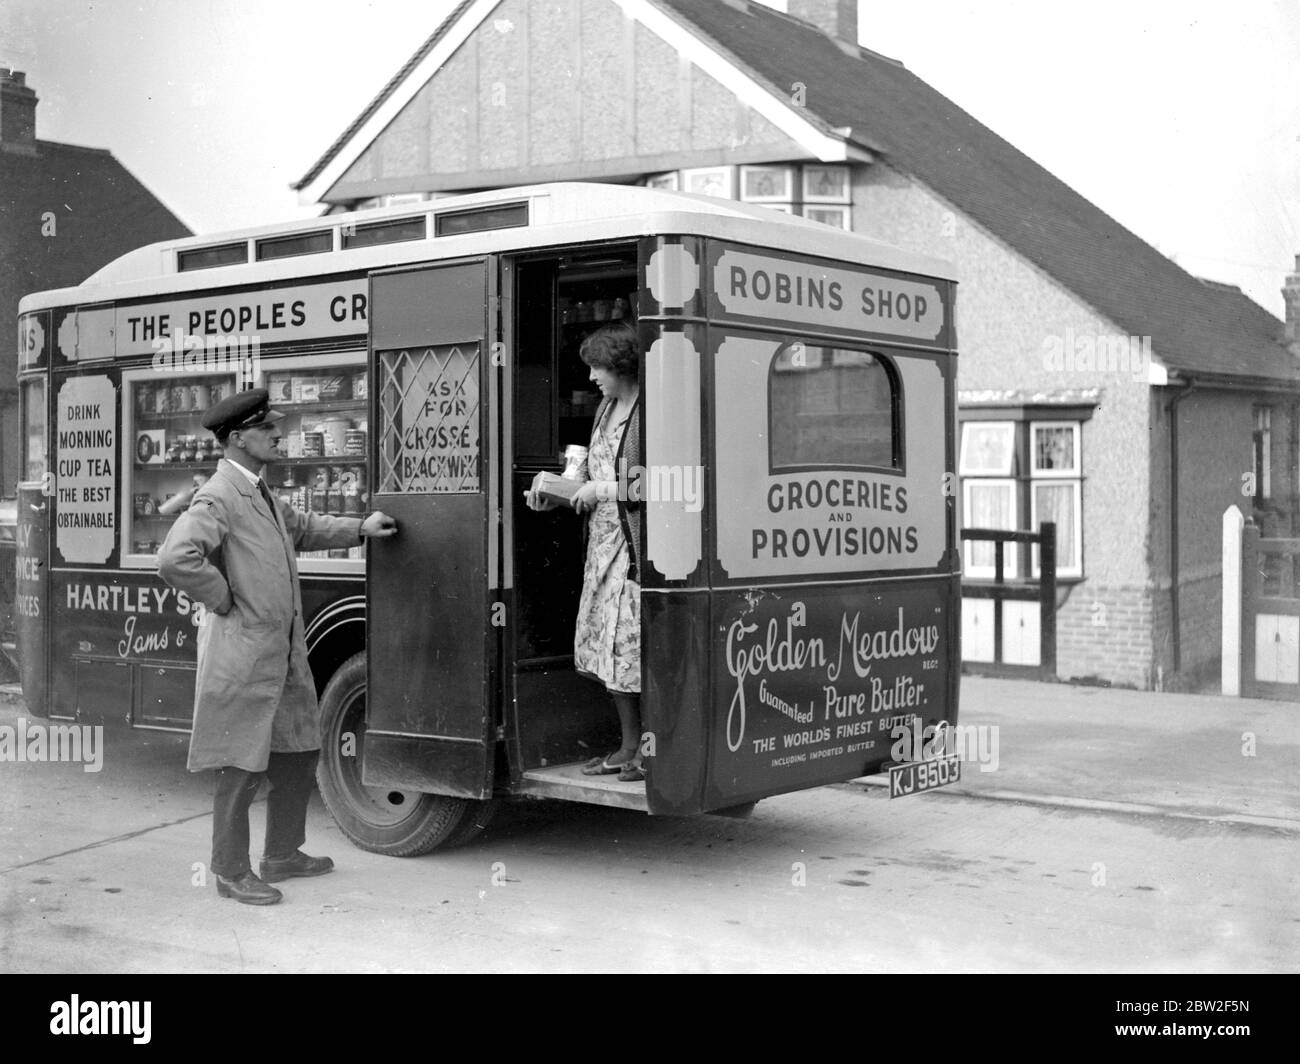 Mobile Shop Van High Resolution Stock Photography and Images - Alamy